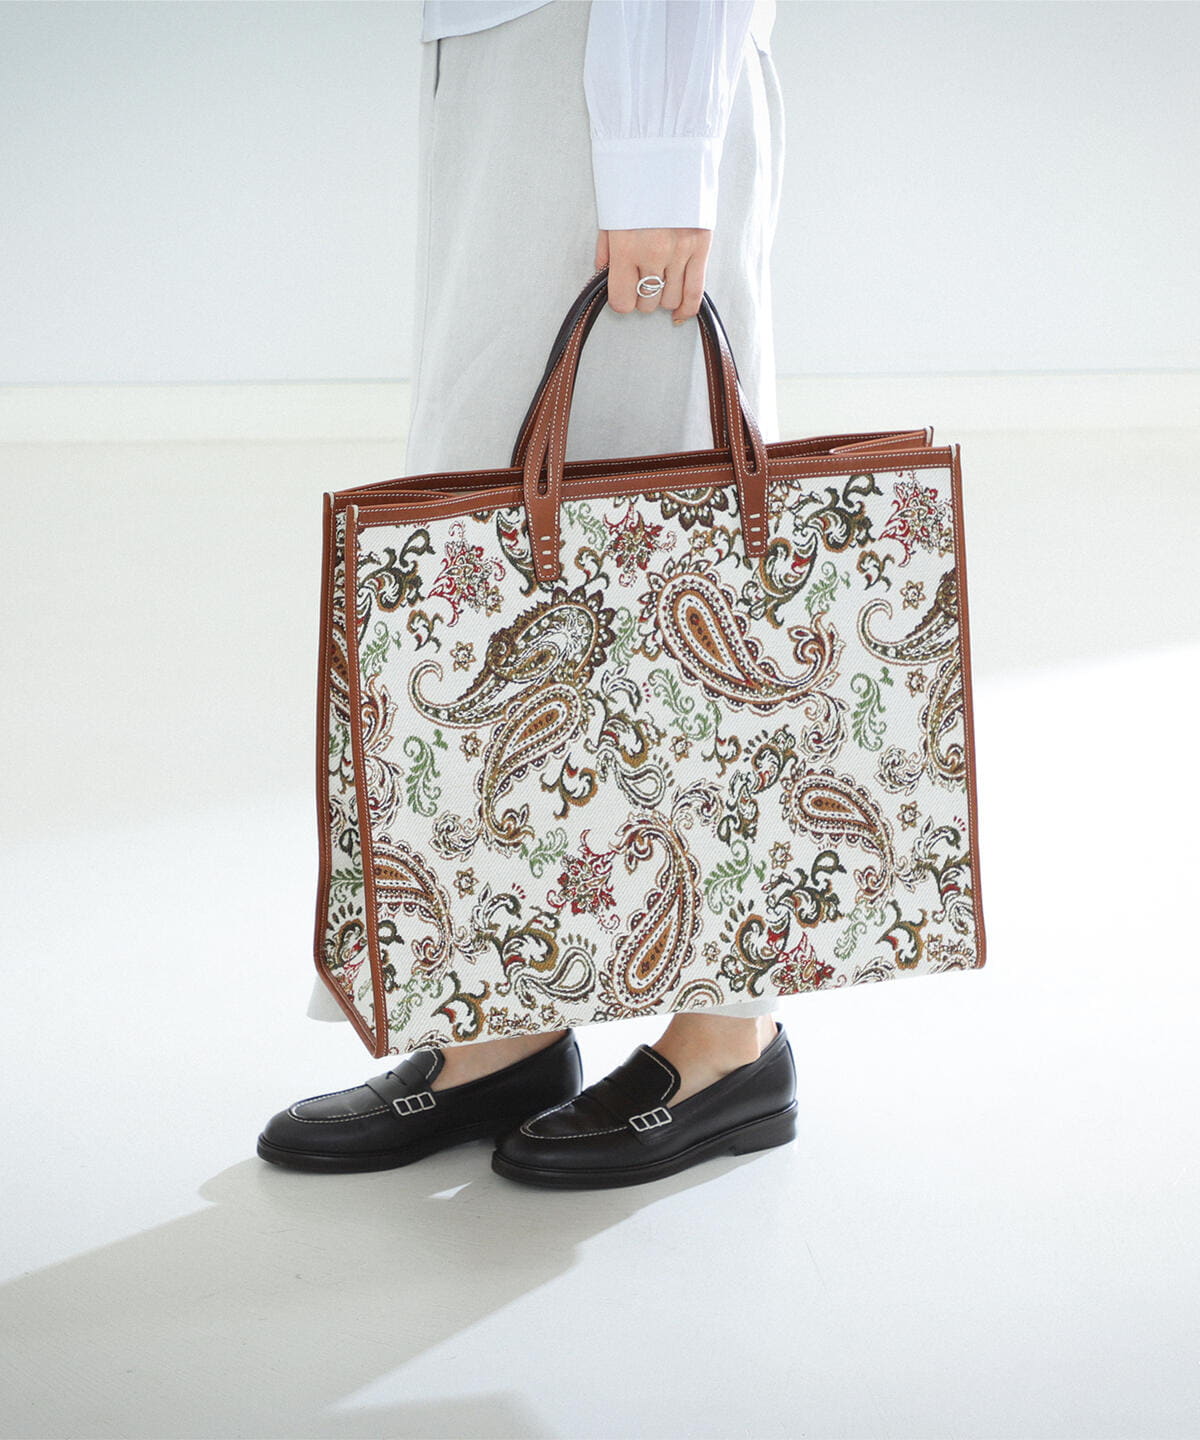 SALE／99%OFF】 A VACATION DAMBO TOTE ナチュラルペイズリー トート